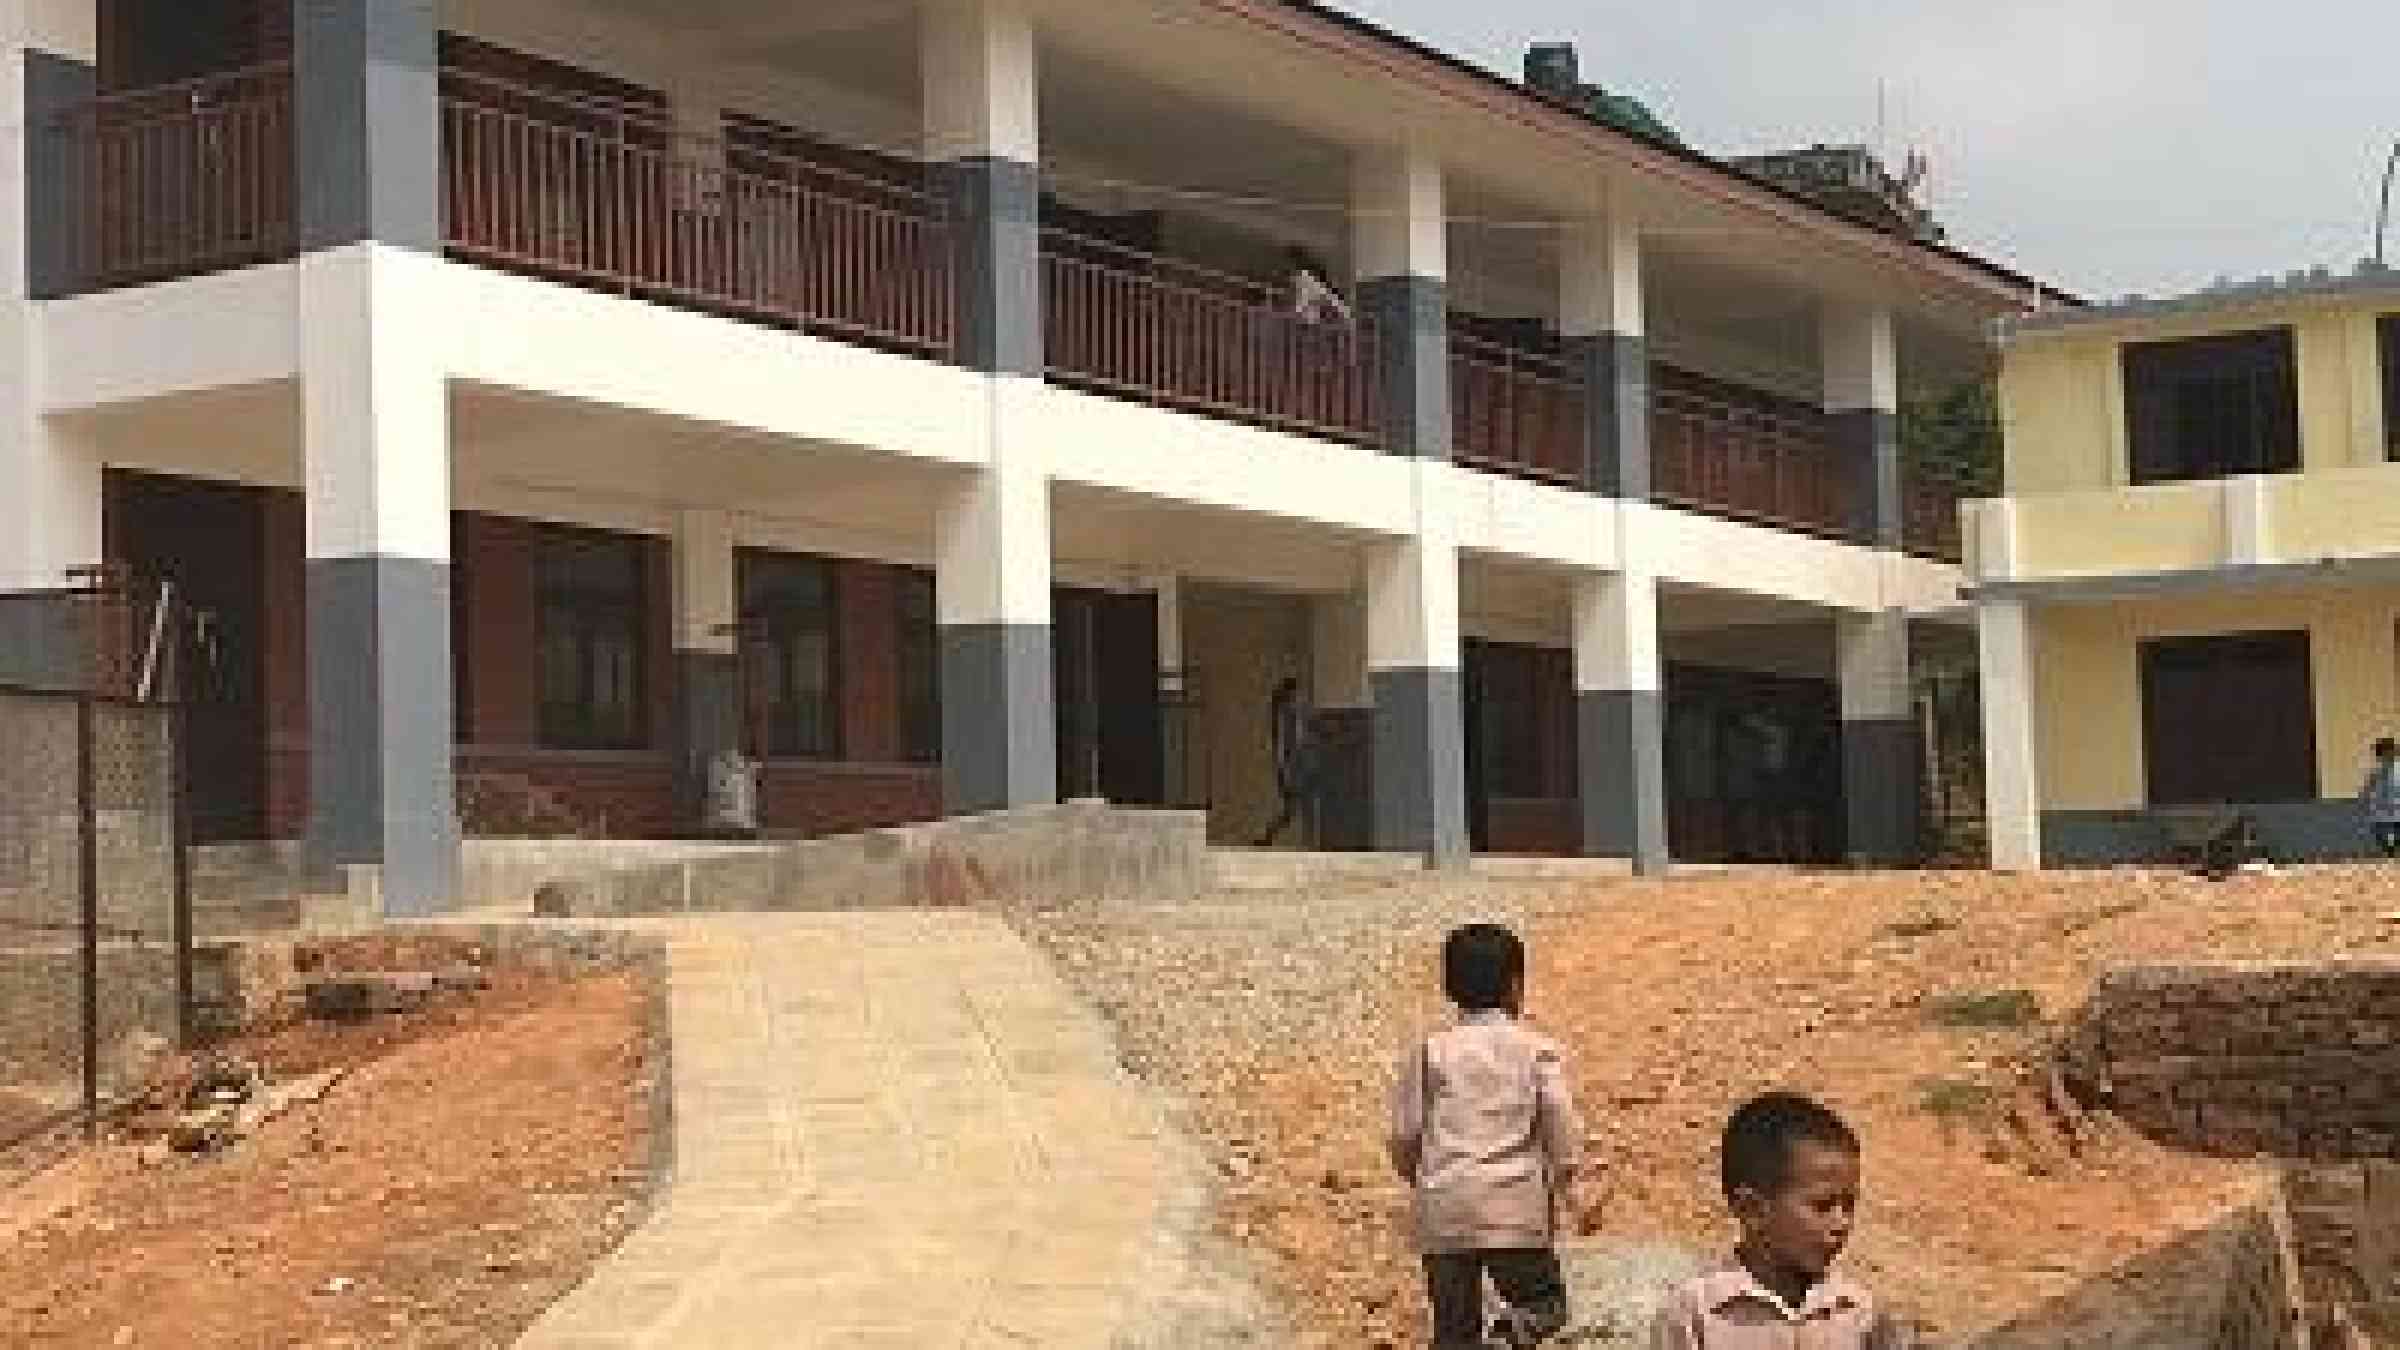 A reconstructed school which lost ten classrooms during Nepal's 2015 earthquake